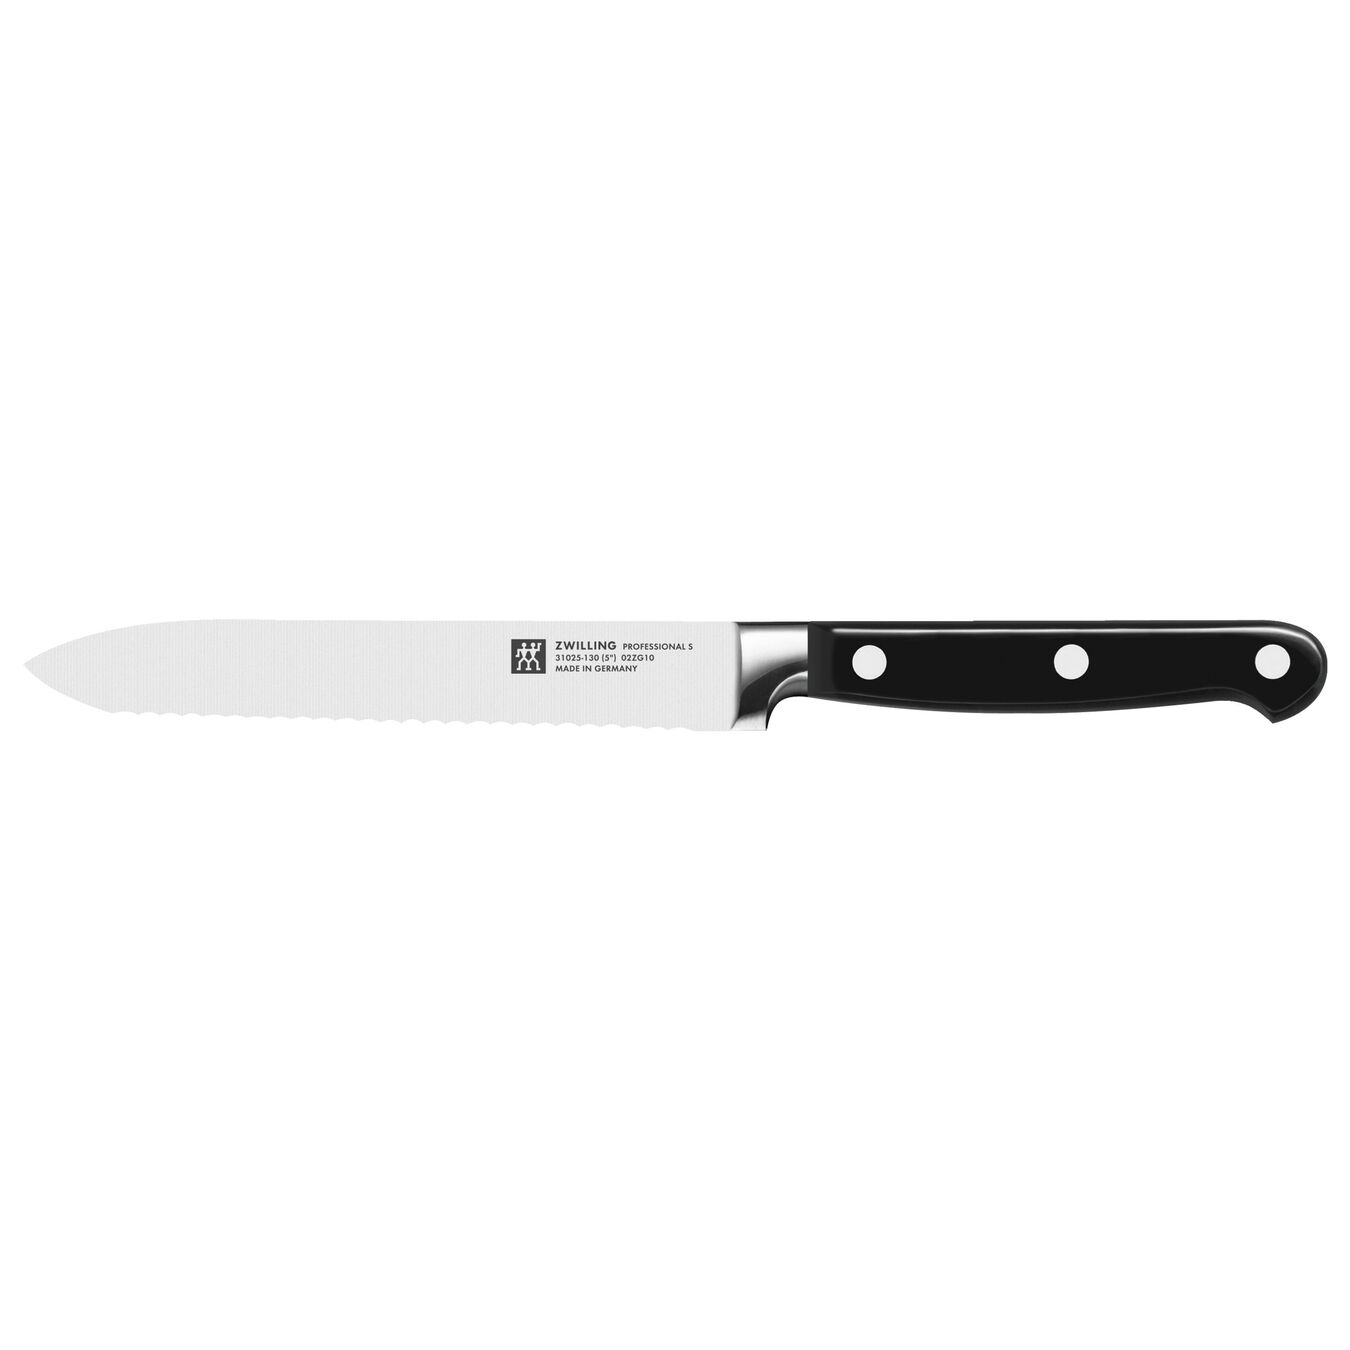 5-inch Utility knife, Serrated edge  - Visual Imperfections,,large 1